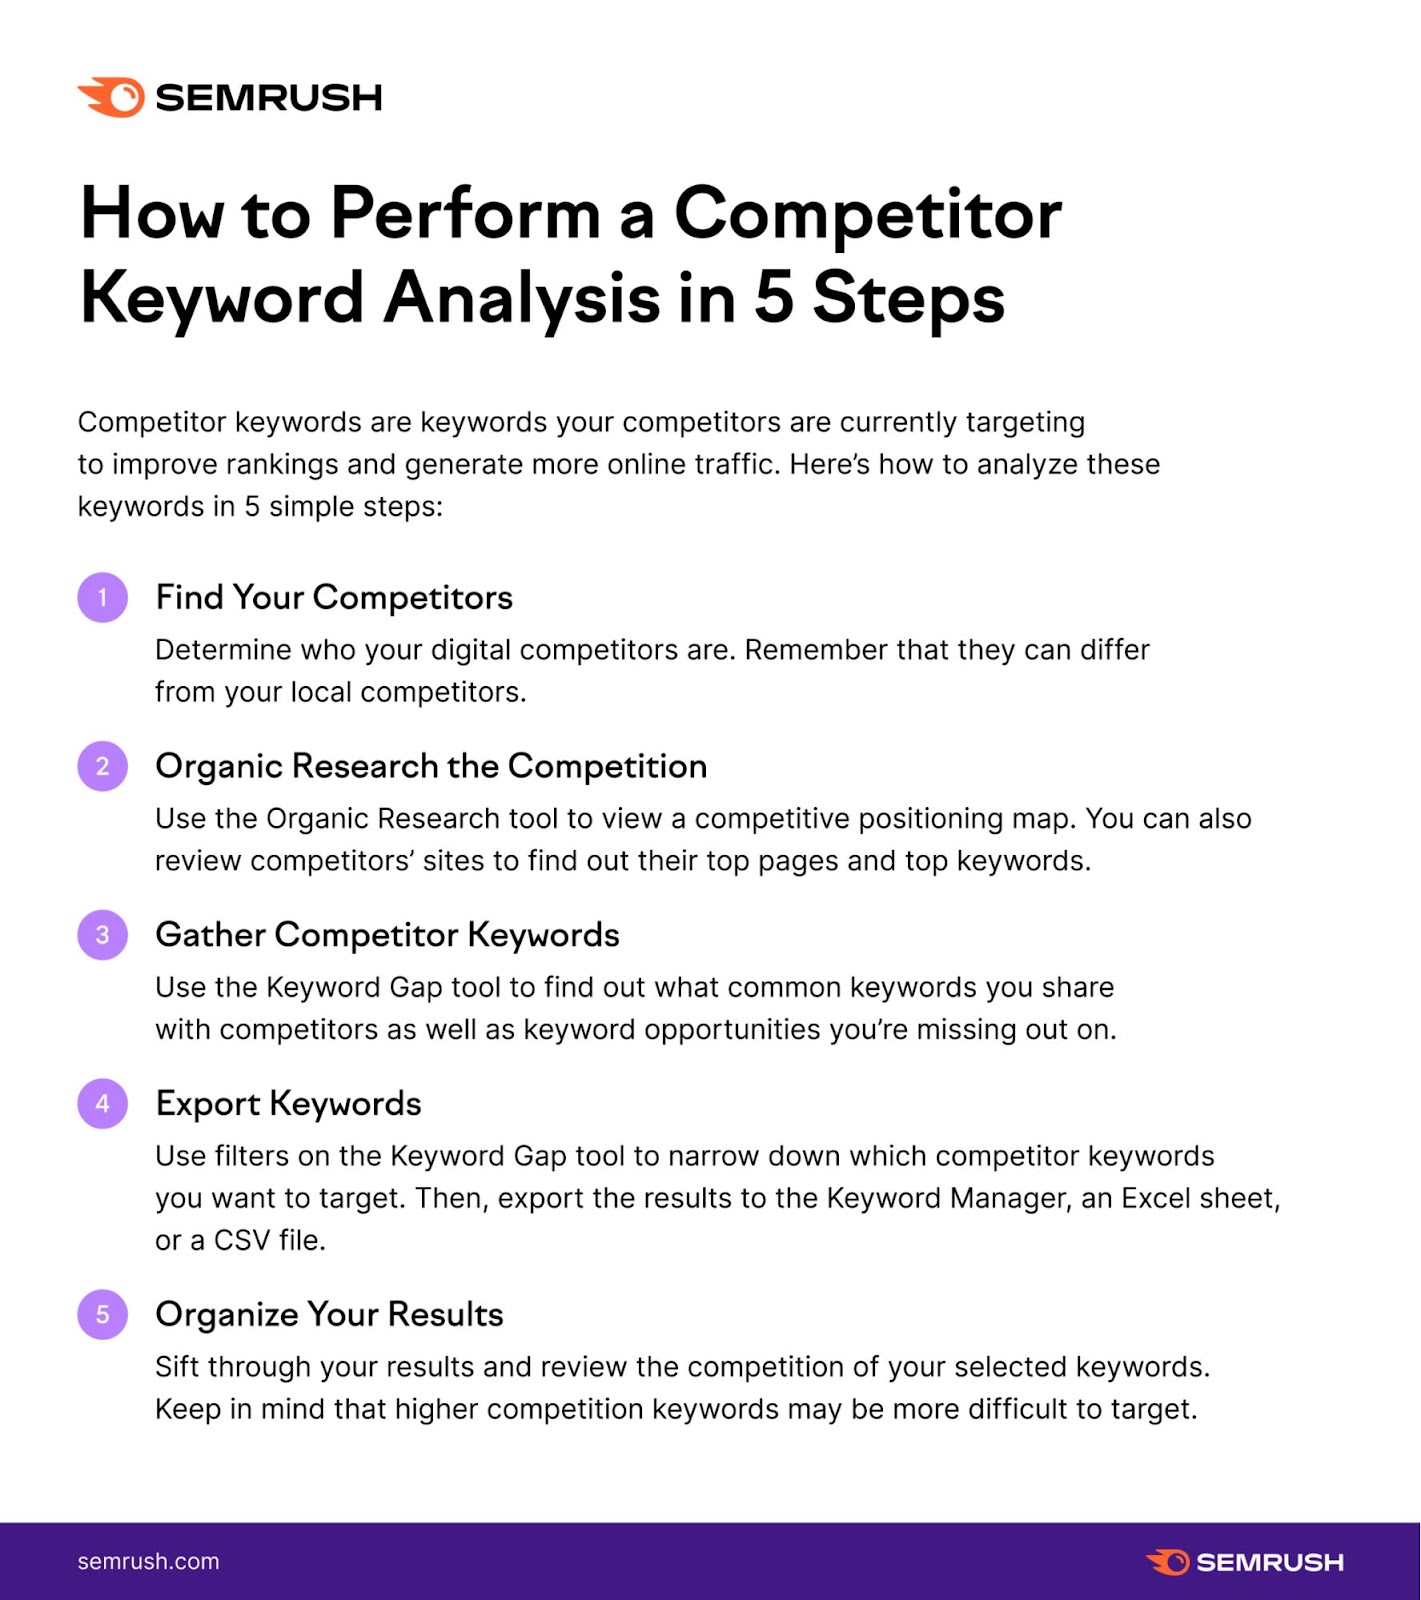 An infographic by Semrush on how to perform a competitor keyword analysis in 5 steps